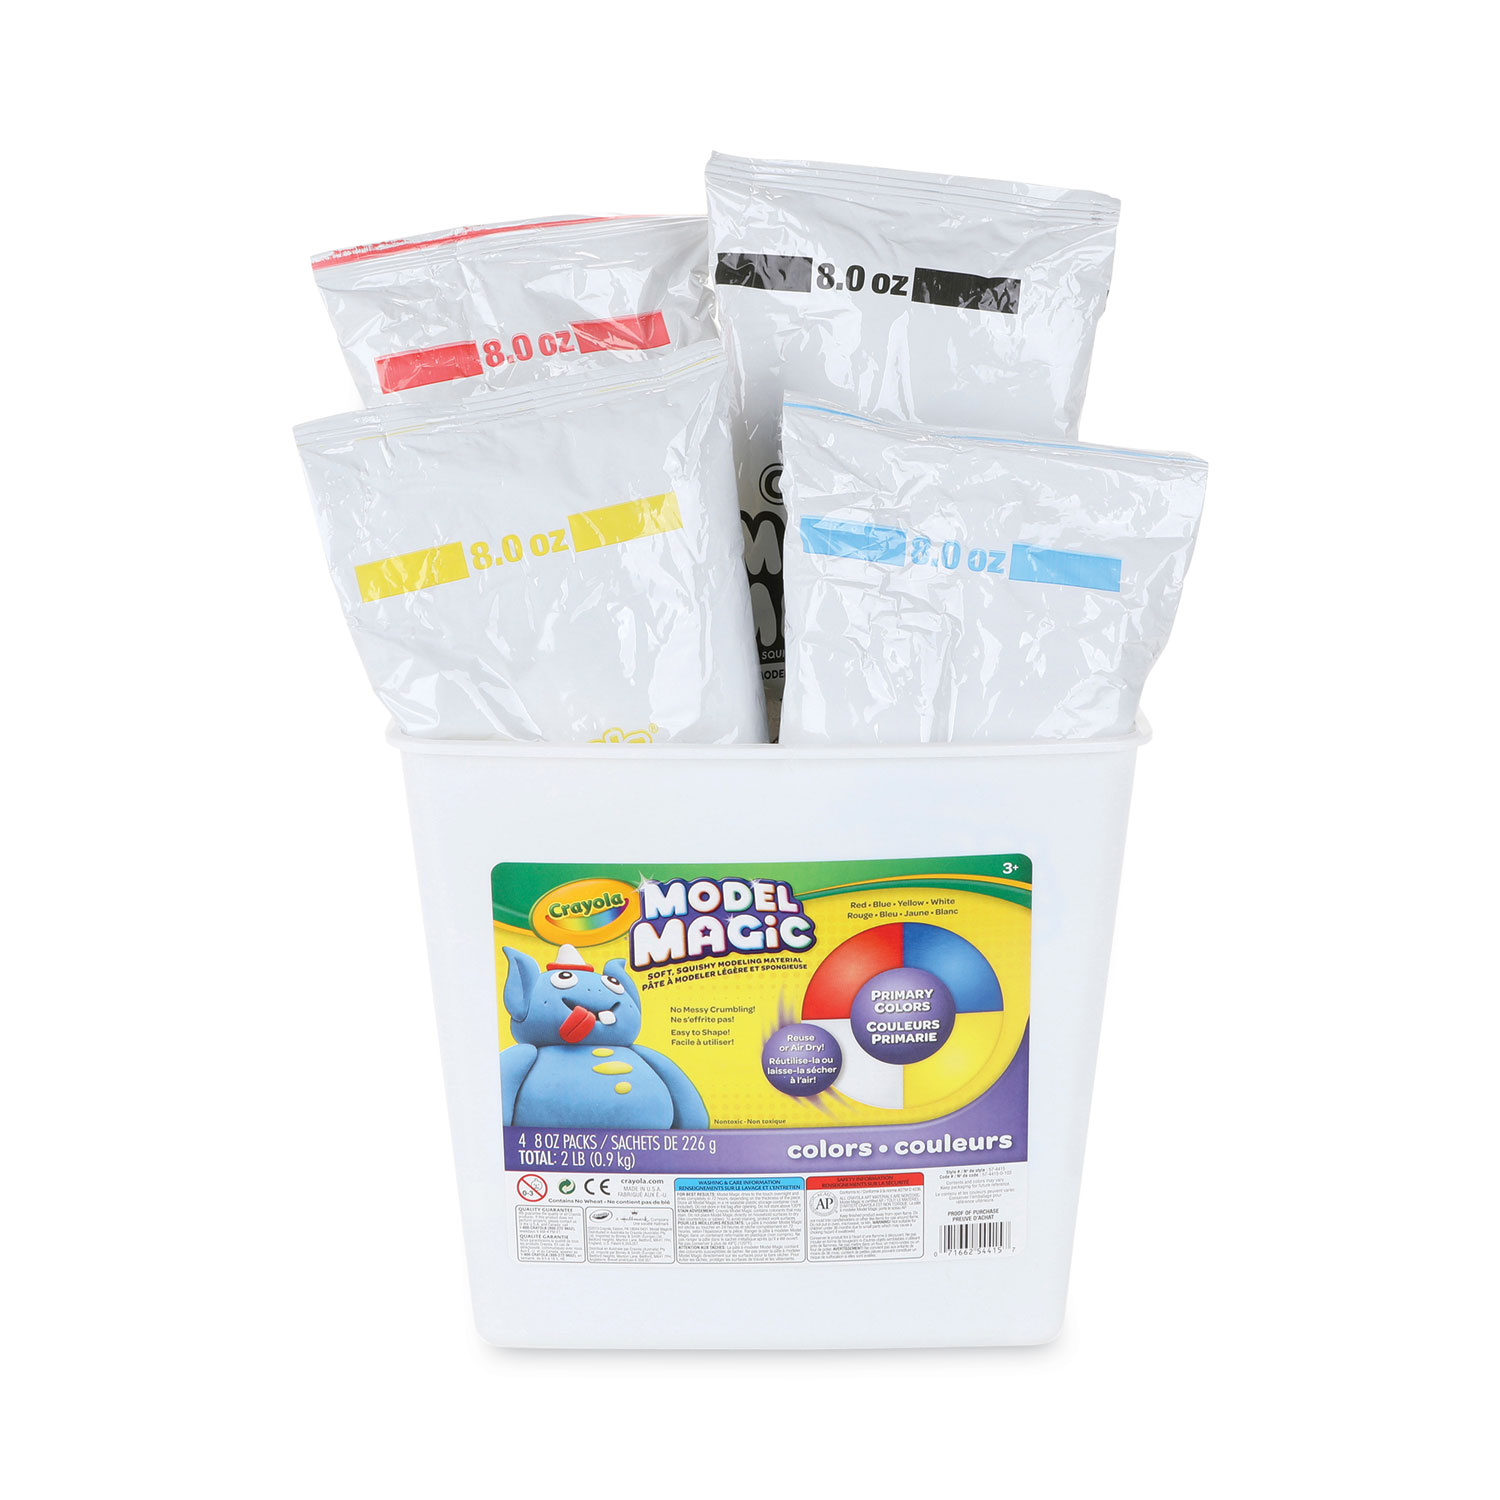 Model Magic Modeling Compound, 8 oz each packet, White, 2 lbs, Sold as 1  Each